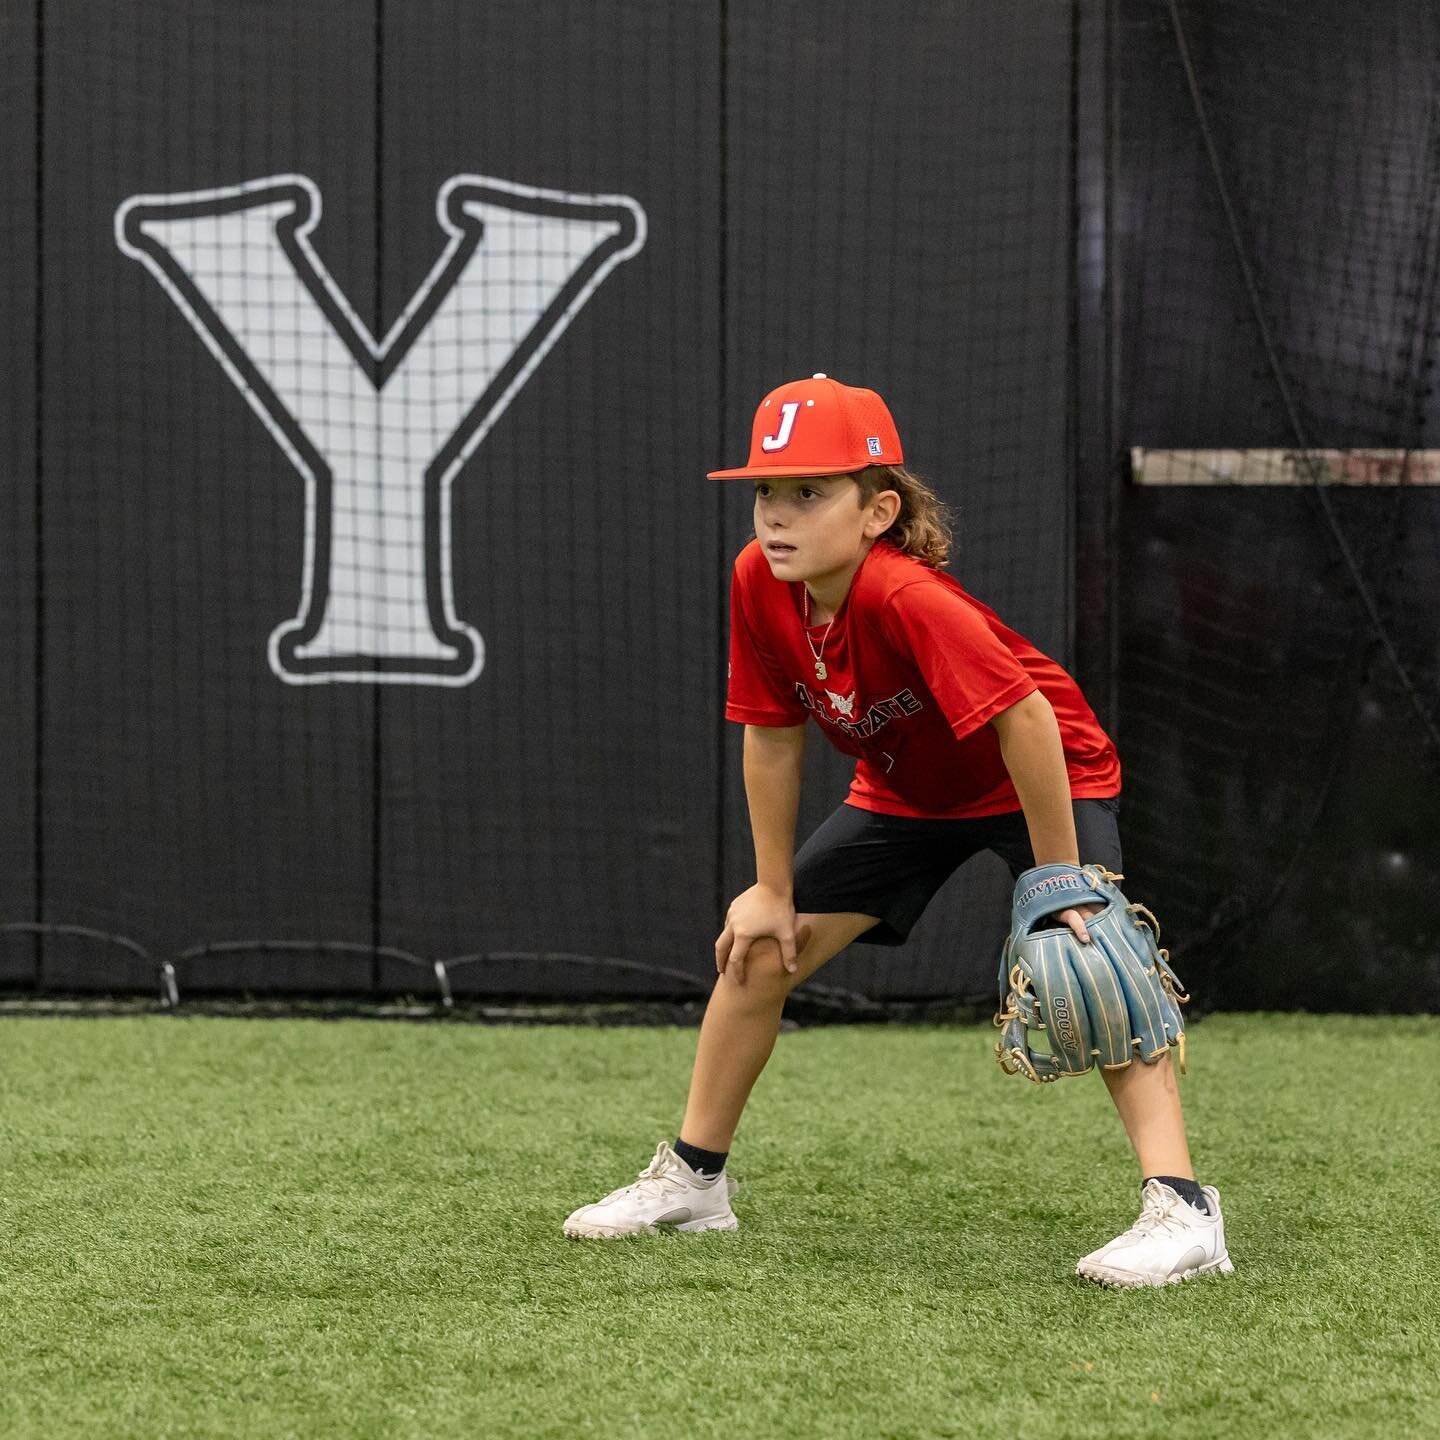 Mark your calendars for 'Saturdays at the Yard'! ⚾️🔥Join us for an amazing time at our clinics. 

💥🥎Don't miss out - sign up now on The Yard @ Wire Park app! 📲 See you there! 👋

#UnleashThePower #makeithappen #baseball #softball #athens #athensg